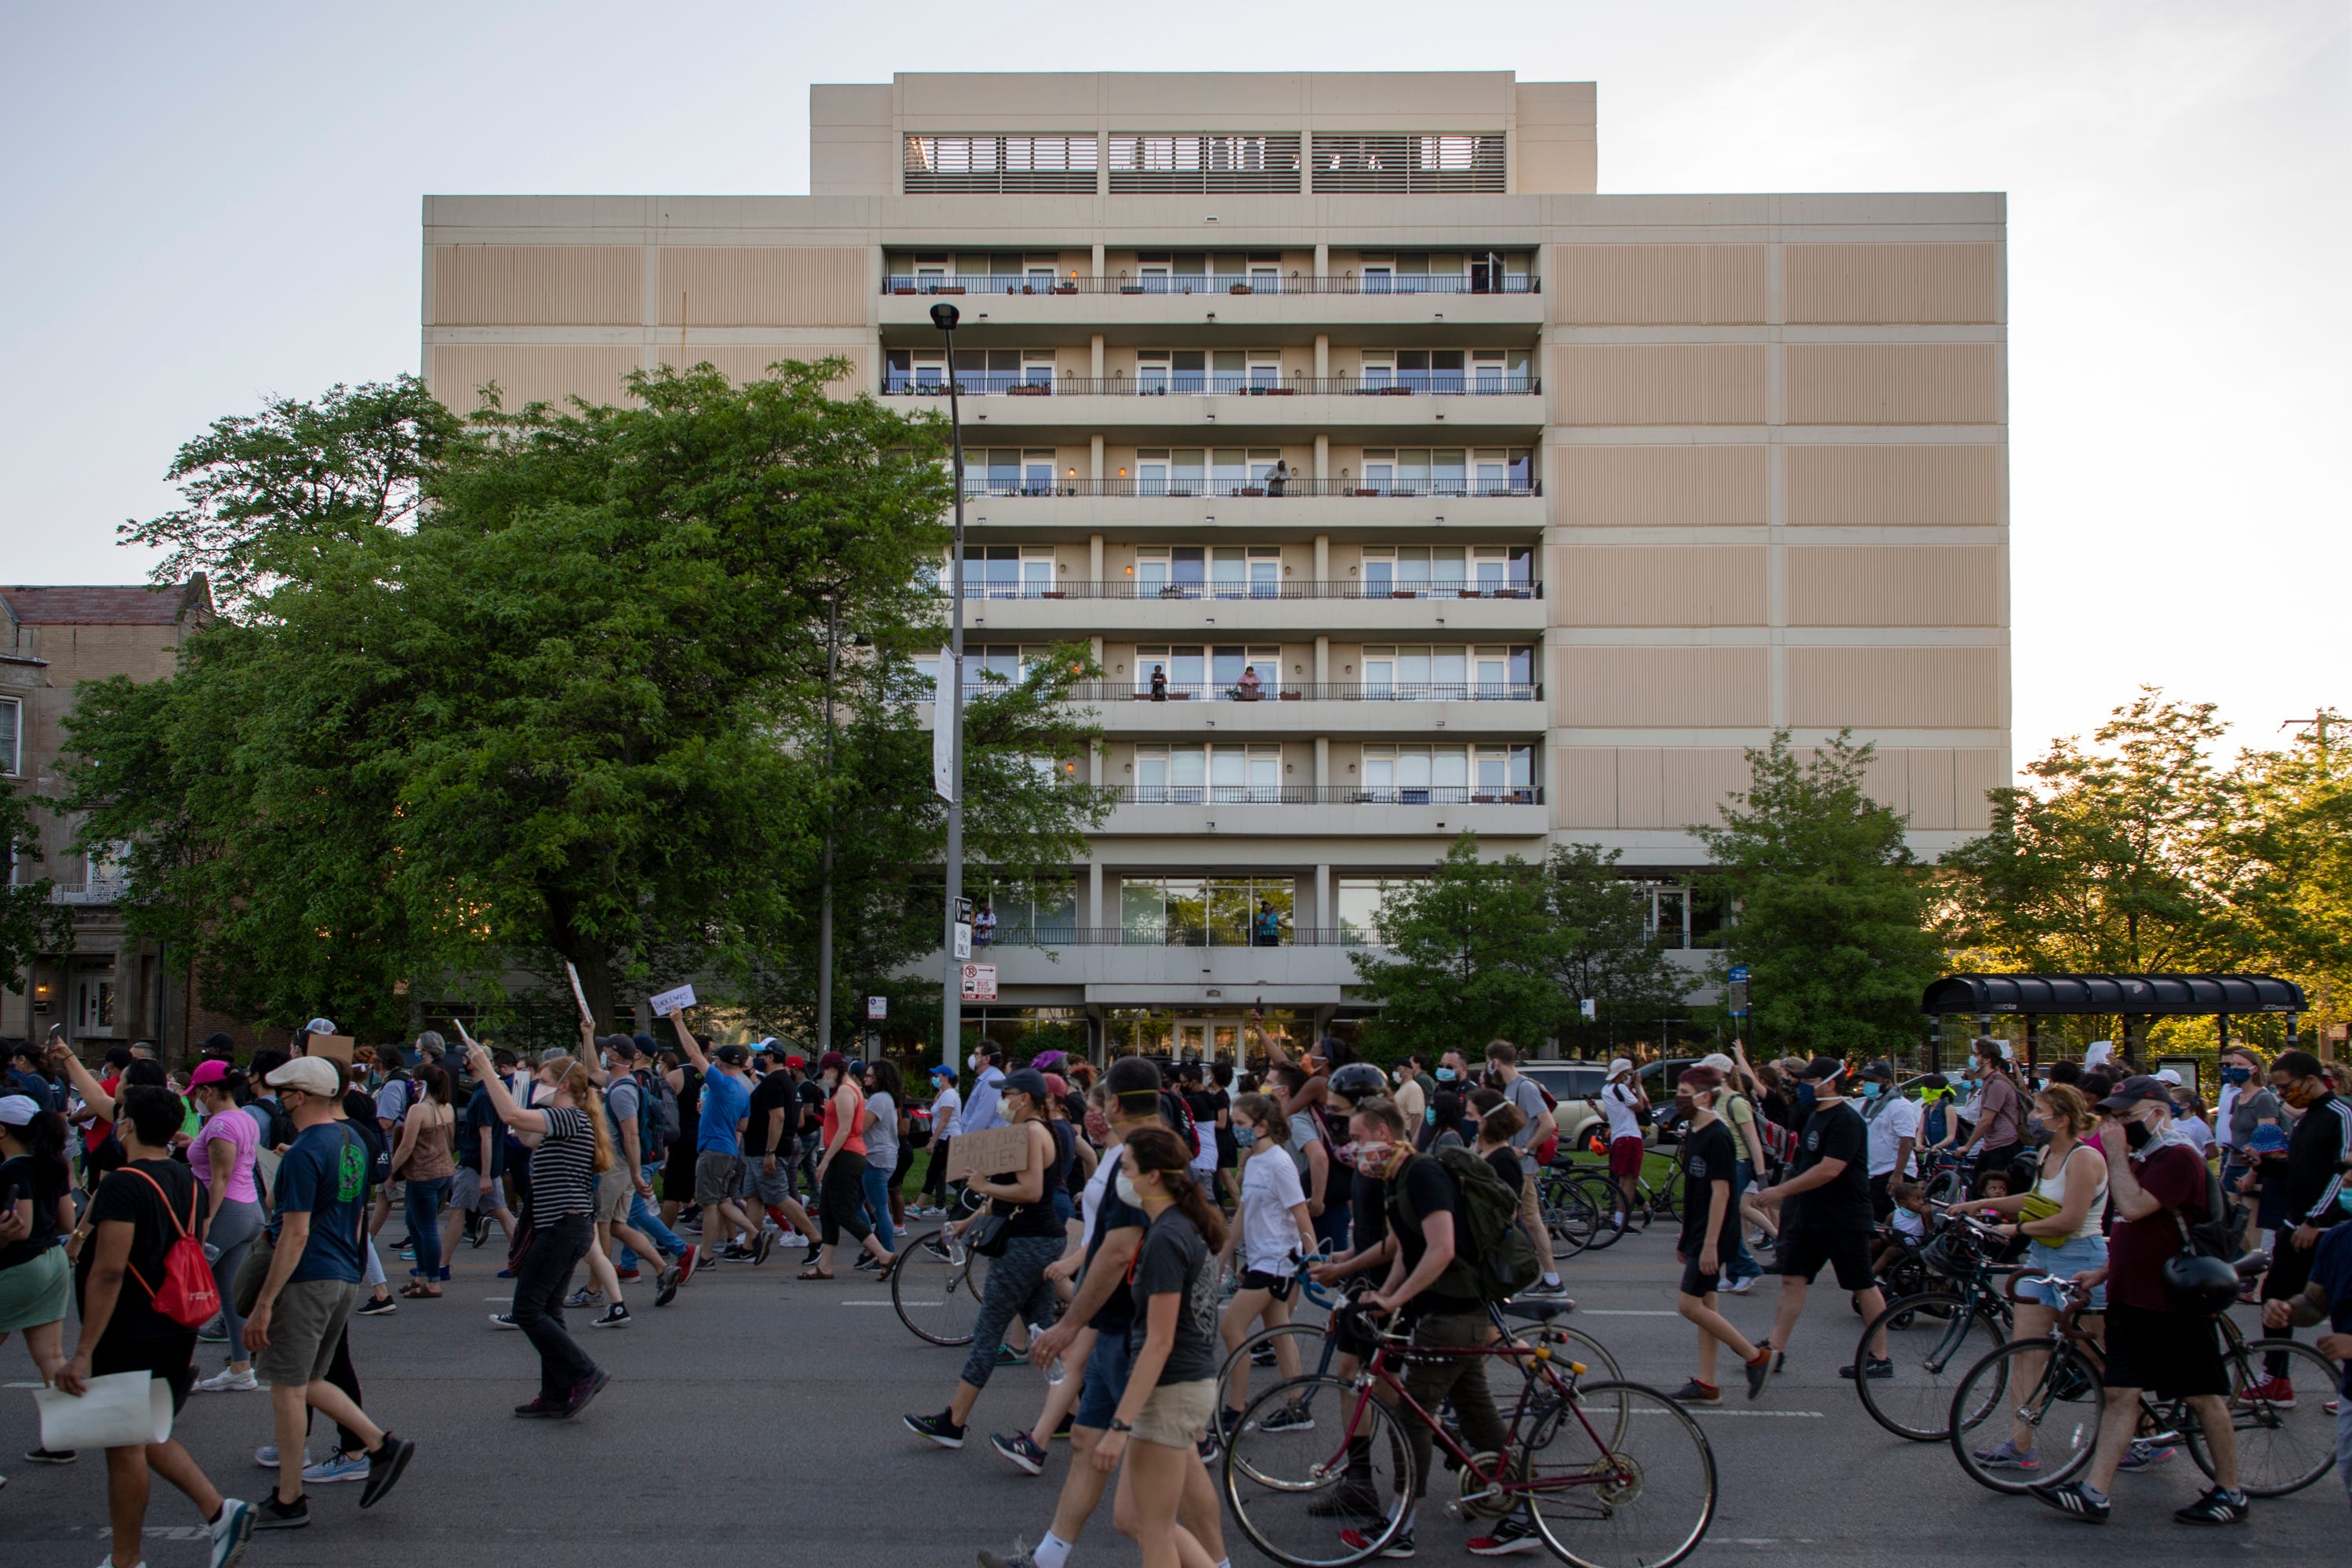 Protestors march down Martin Luther King Drive on the south side of Chicago on Jun 2, 2020.